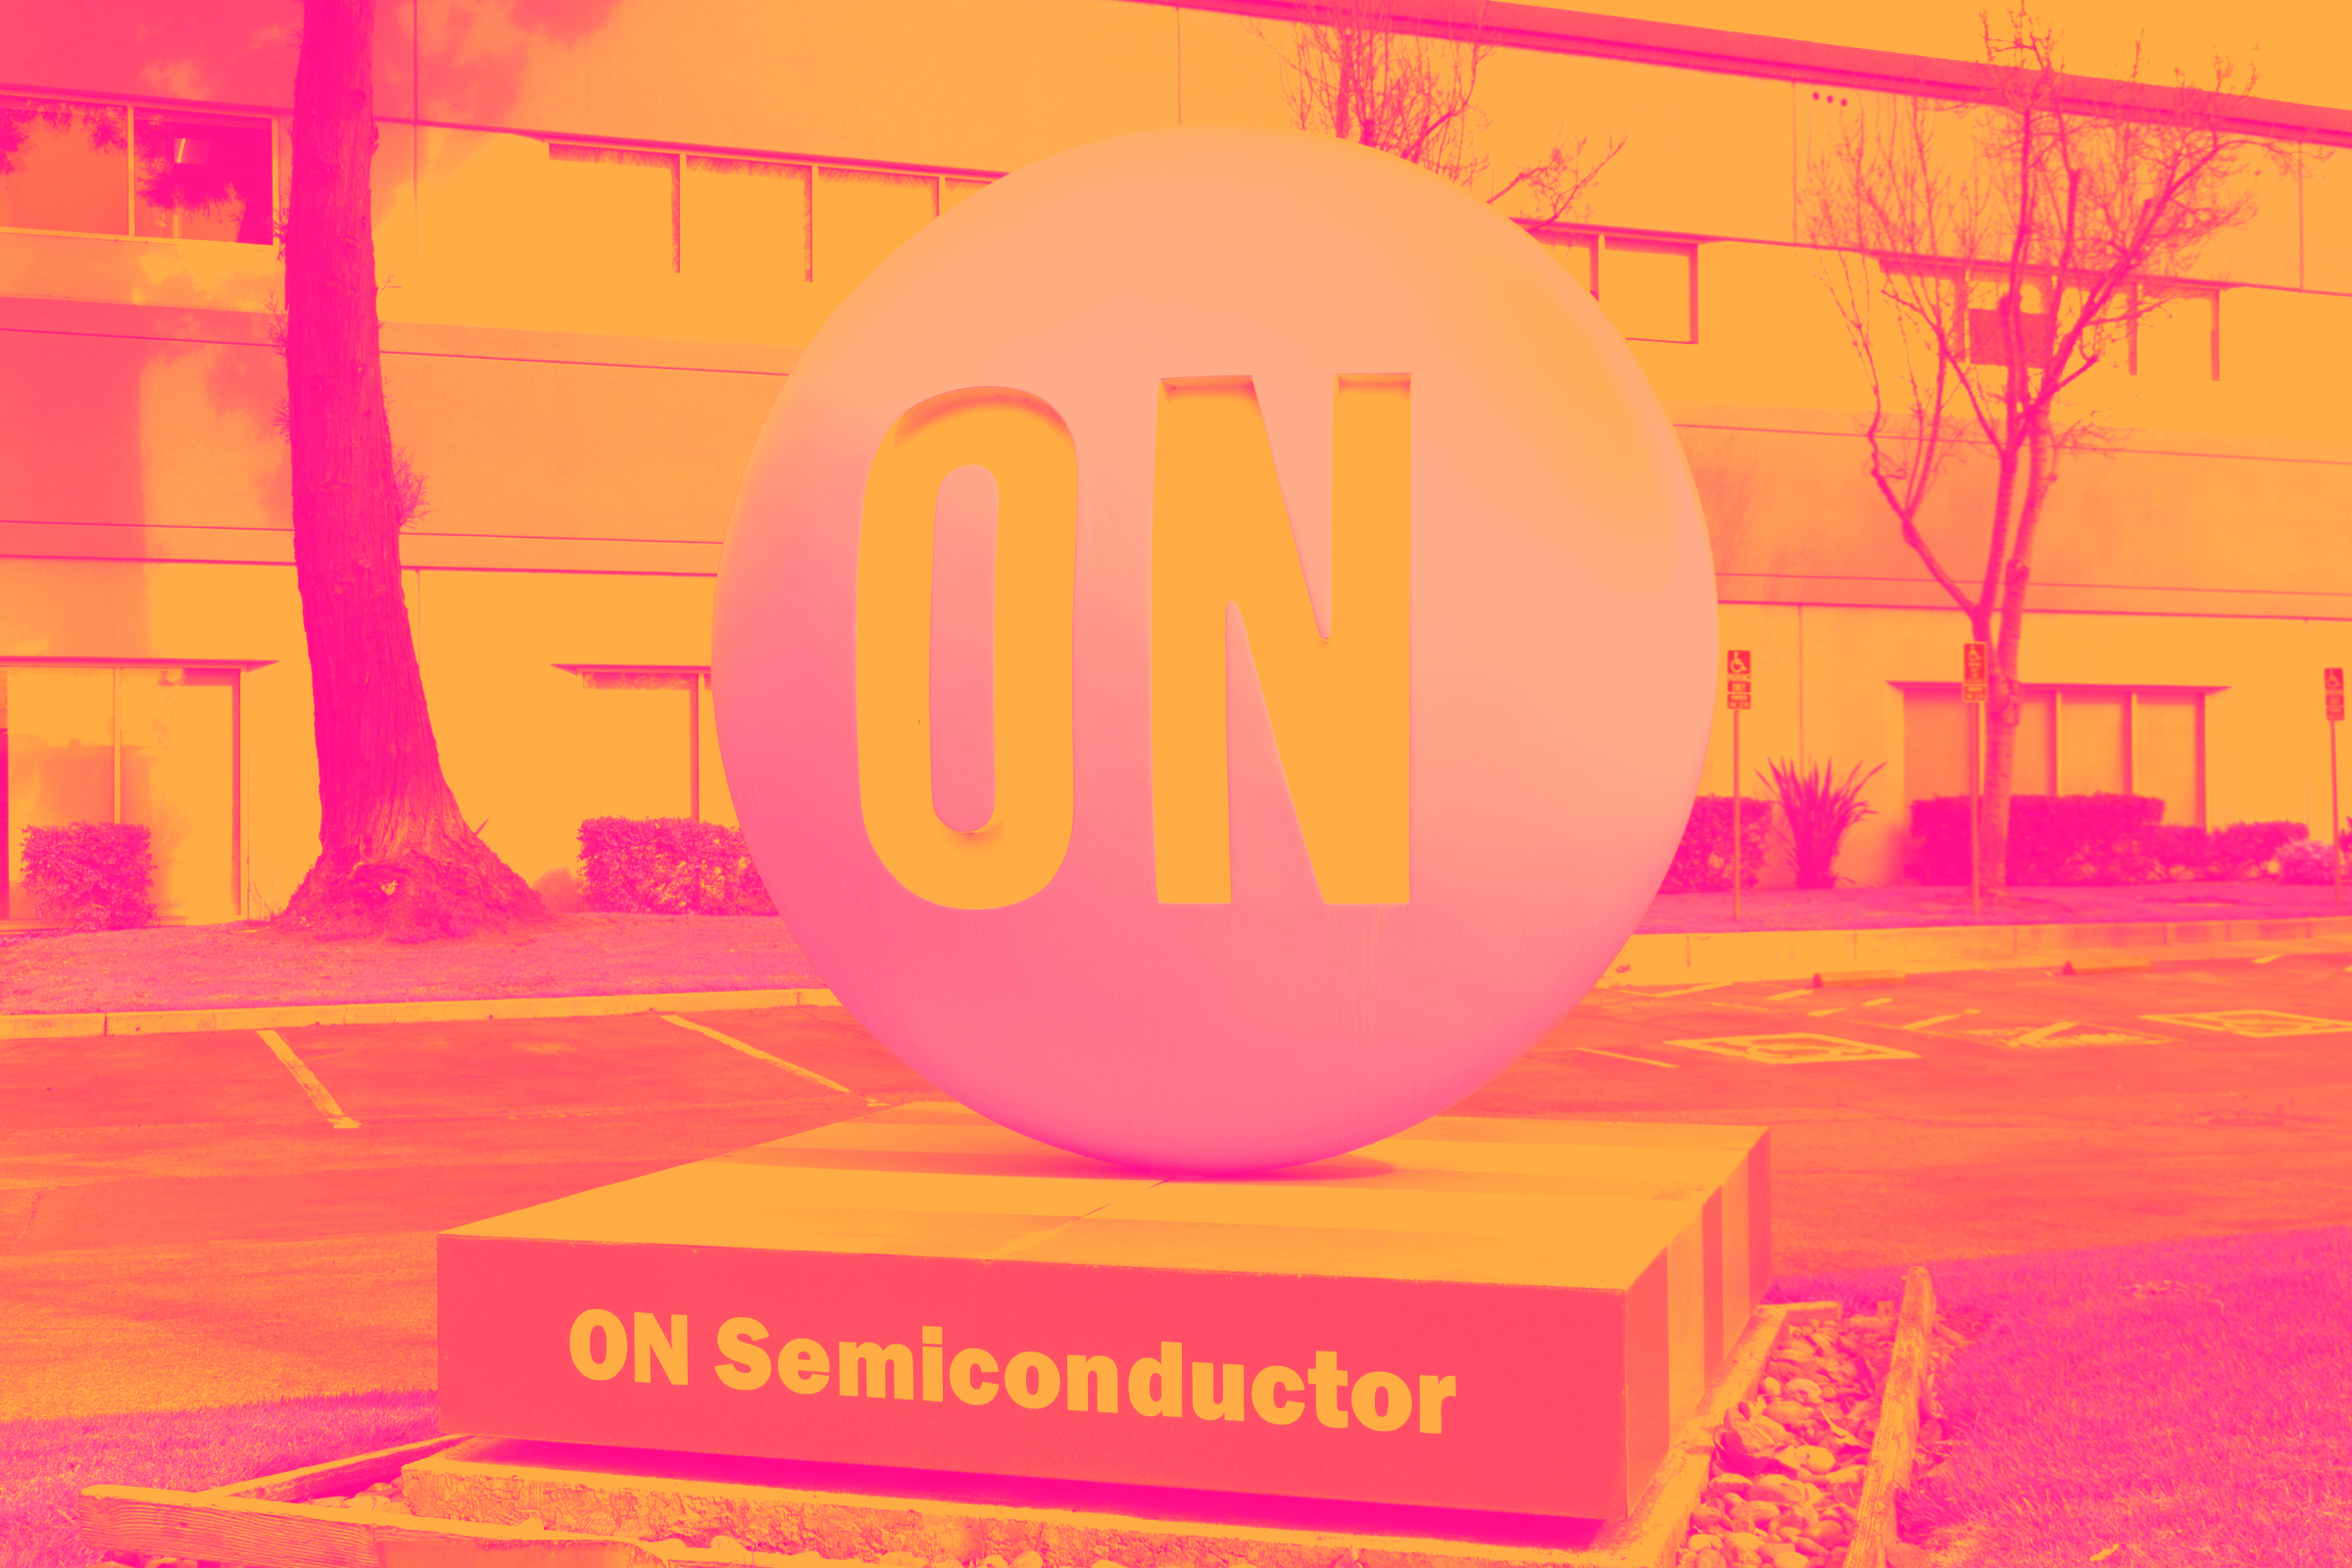 On semiconductor cover image Yjo49vn Y